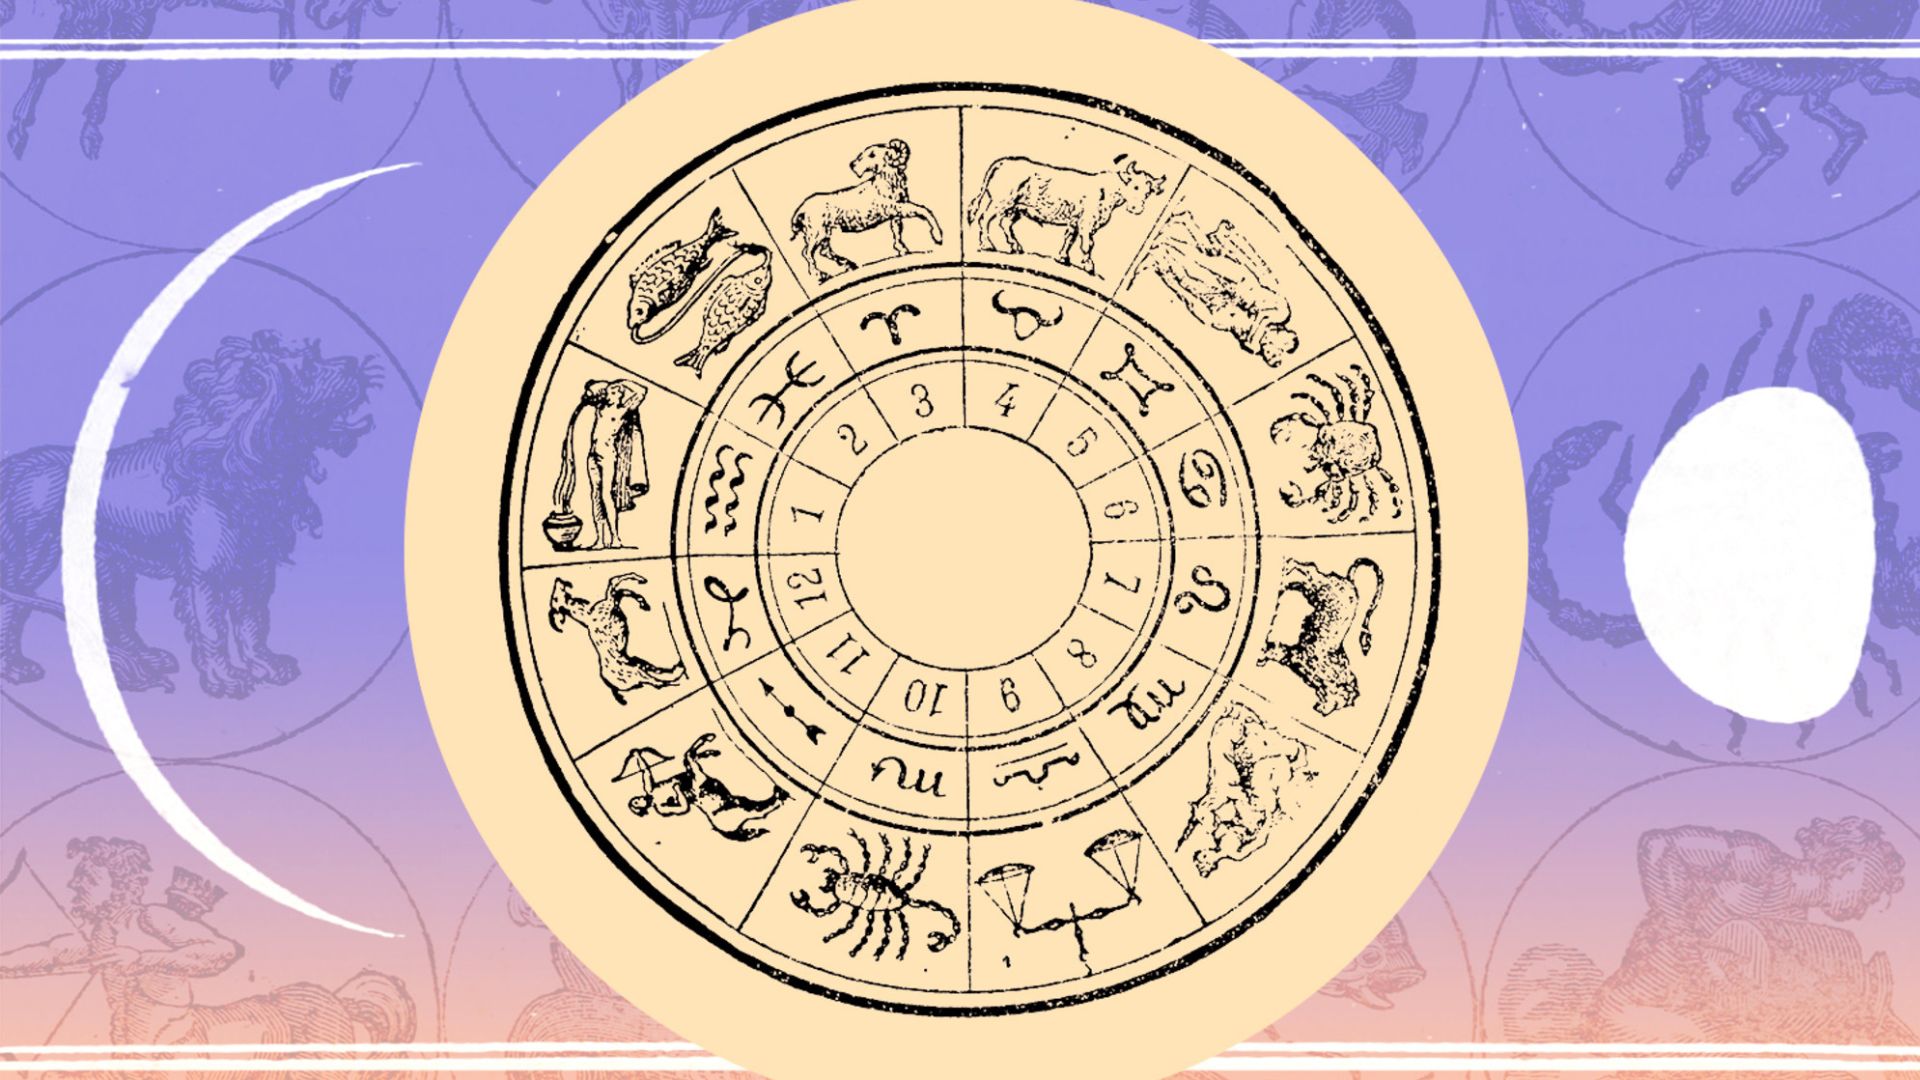 Zodiac Sign And Their Images With Moons